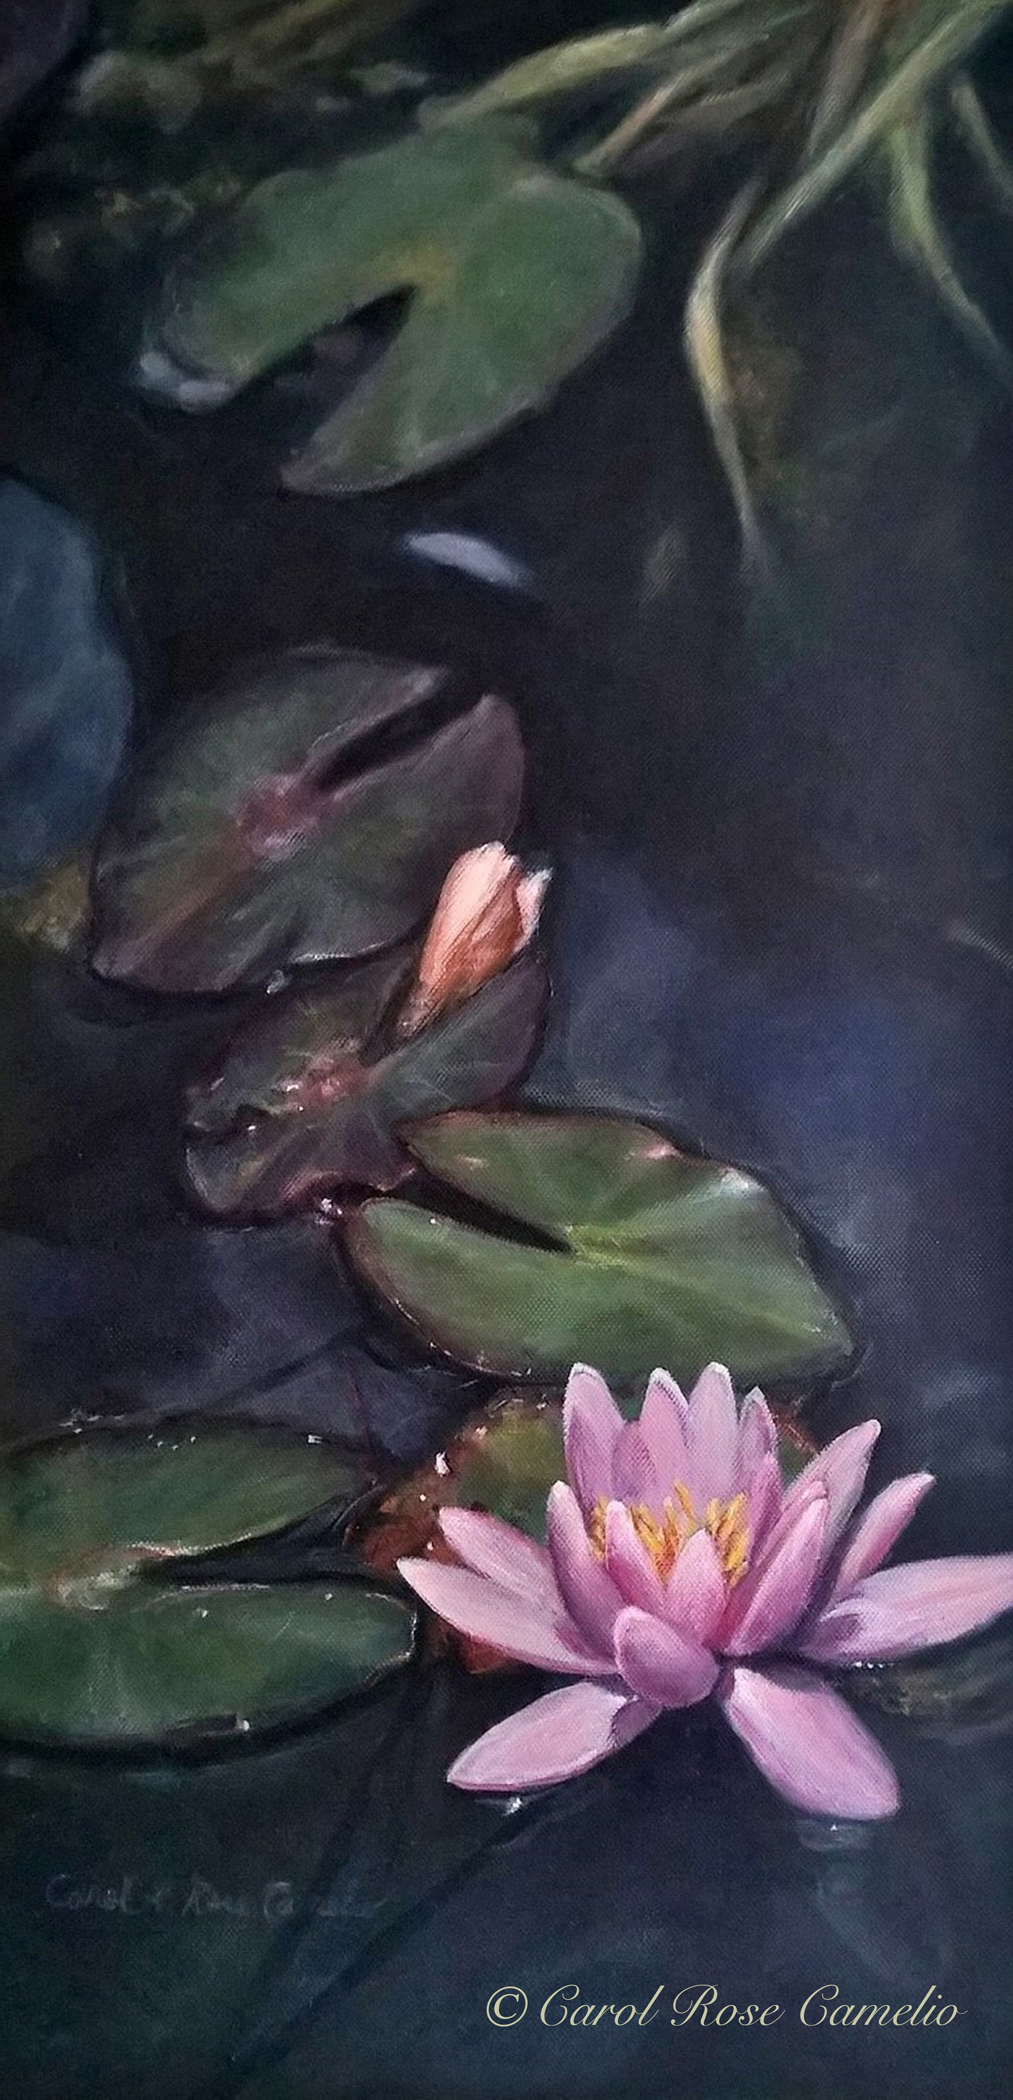 Lily: A water lily among lilypads on the surface of a dark pond.